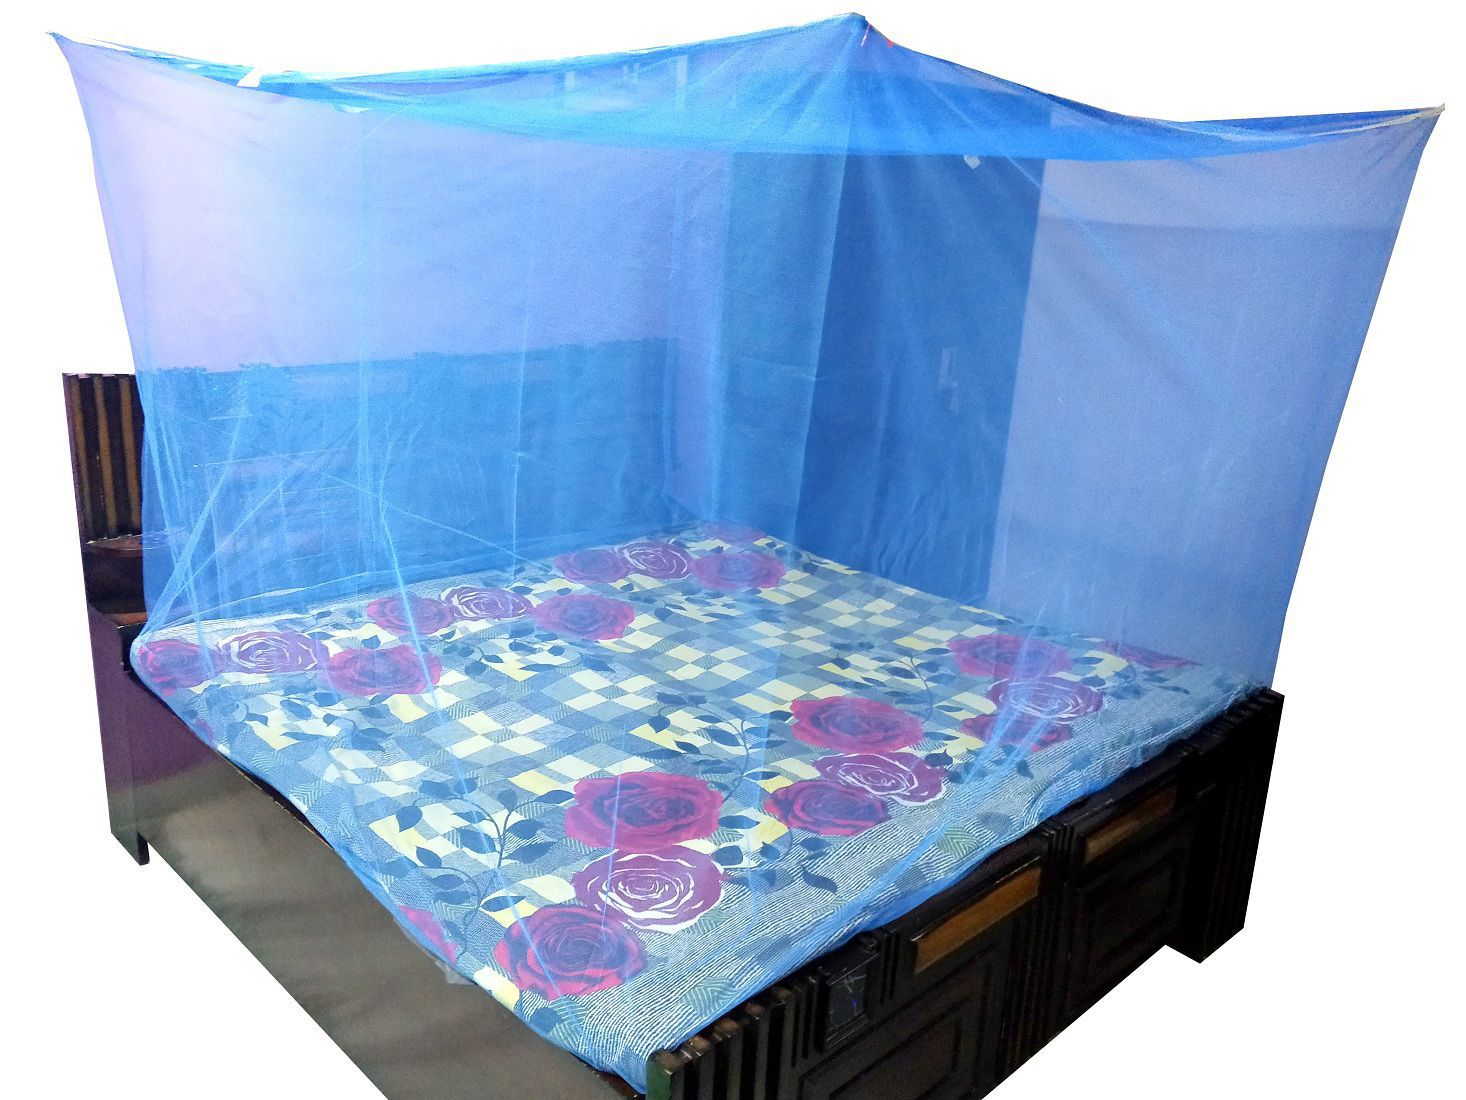 mosquito net for 6x6 bed